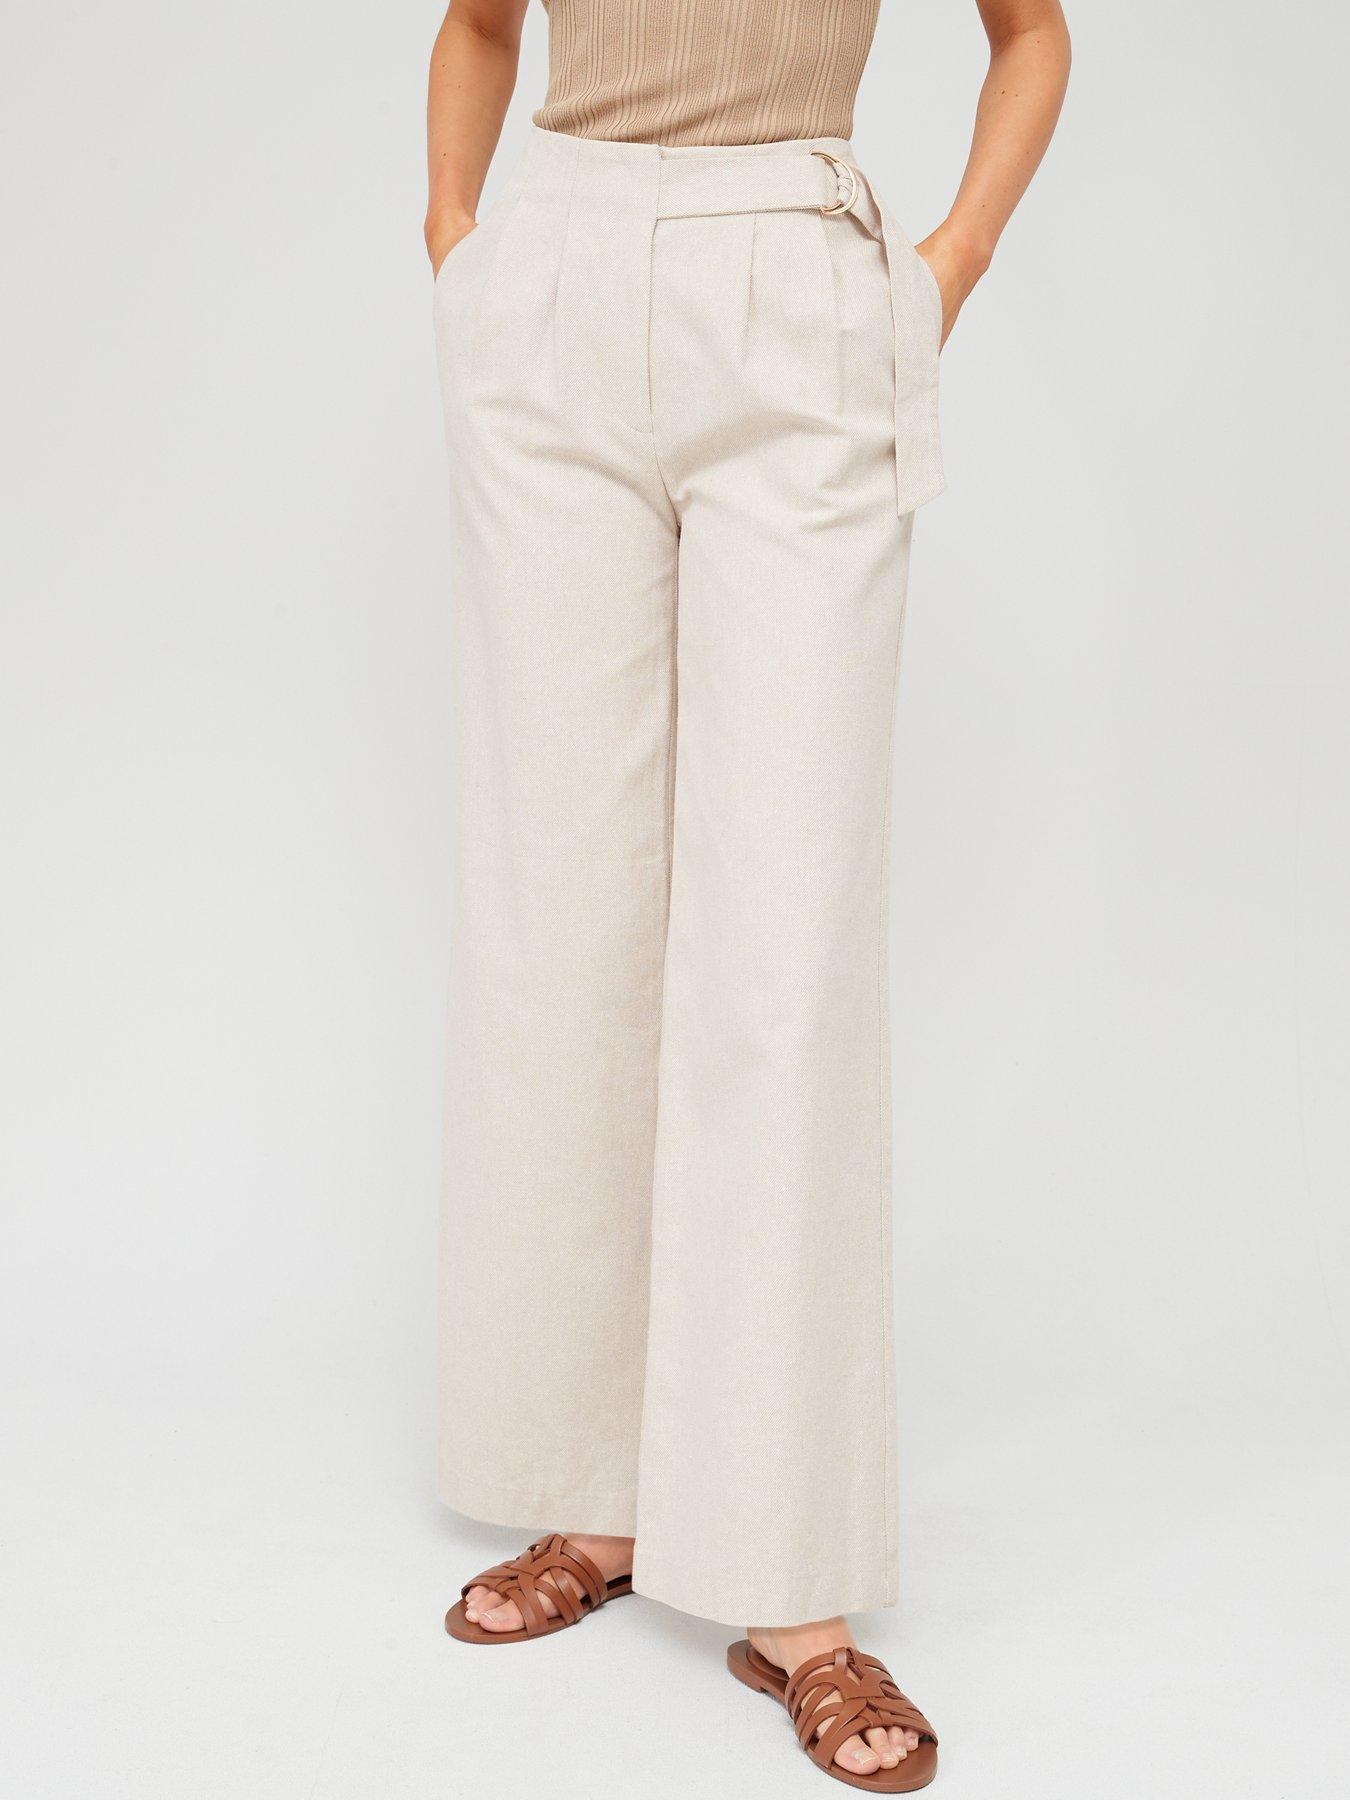 Everyday Girlfriend Chino Trouser With Stretch